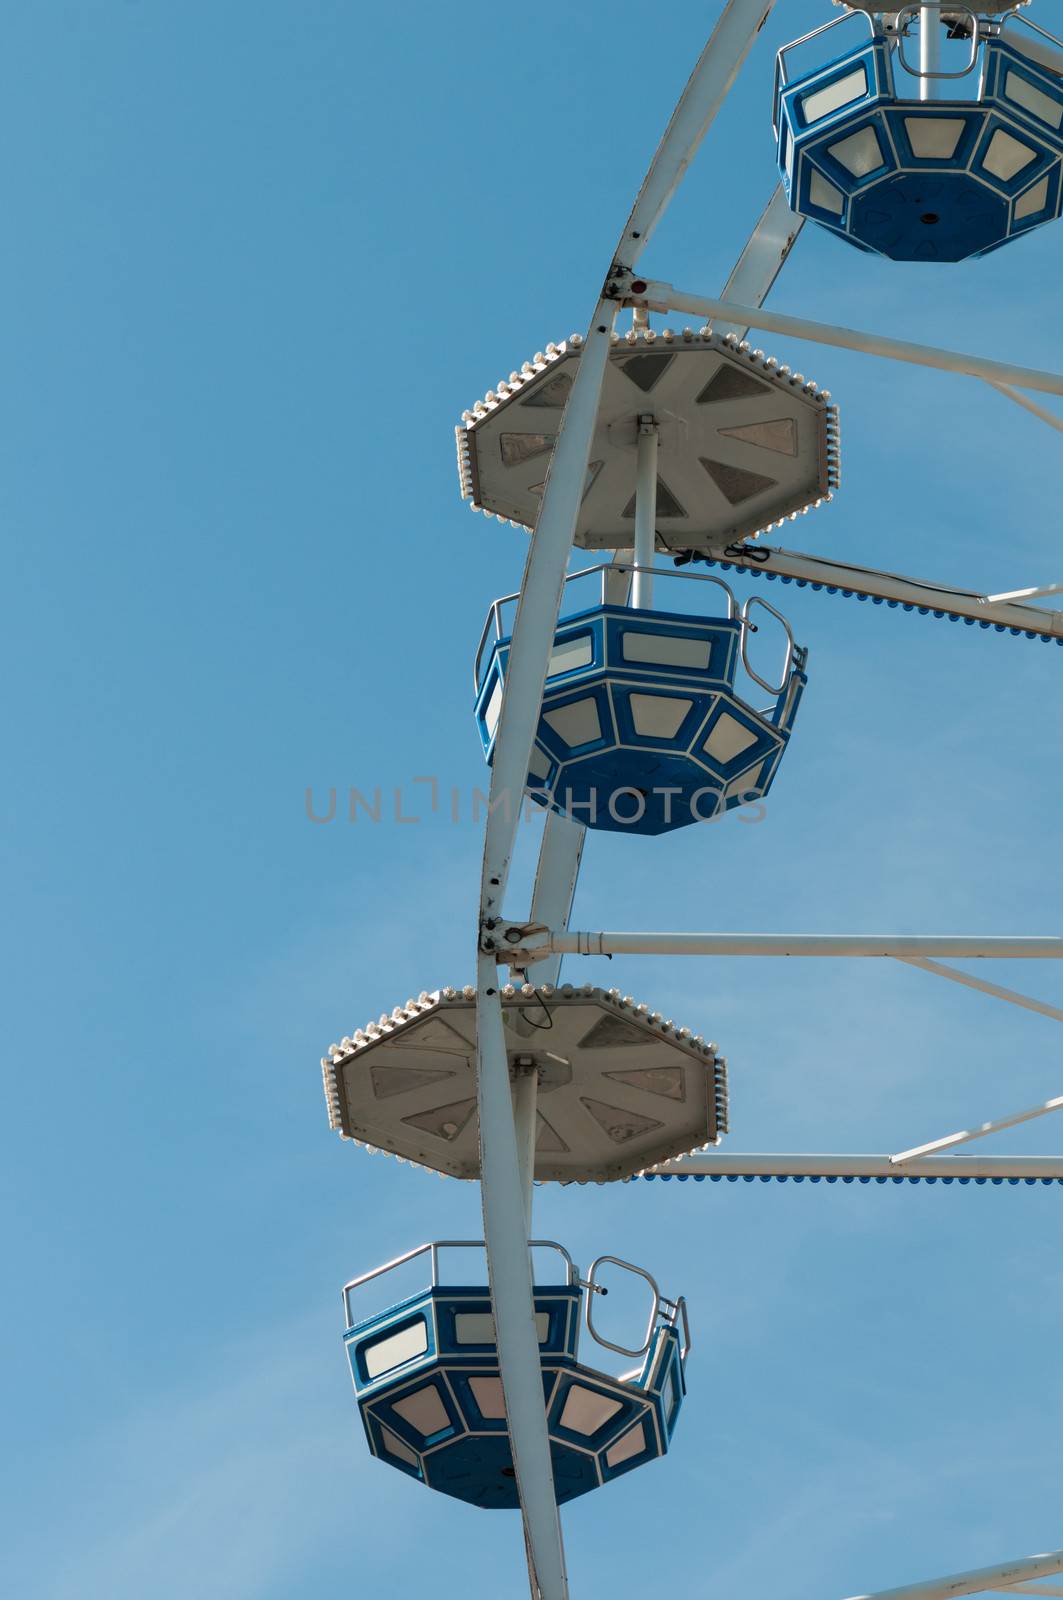 Shot some cabins of ferris wheel over blue sky